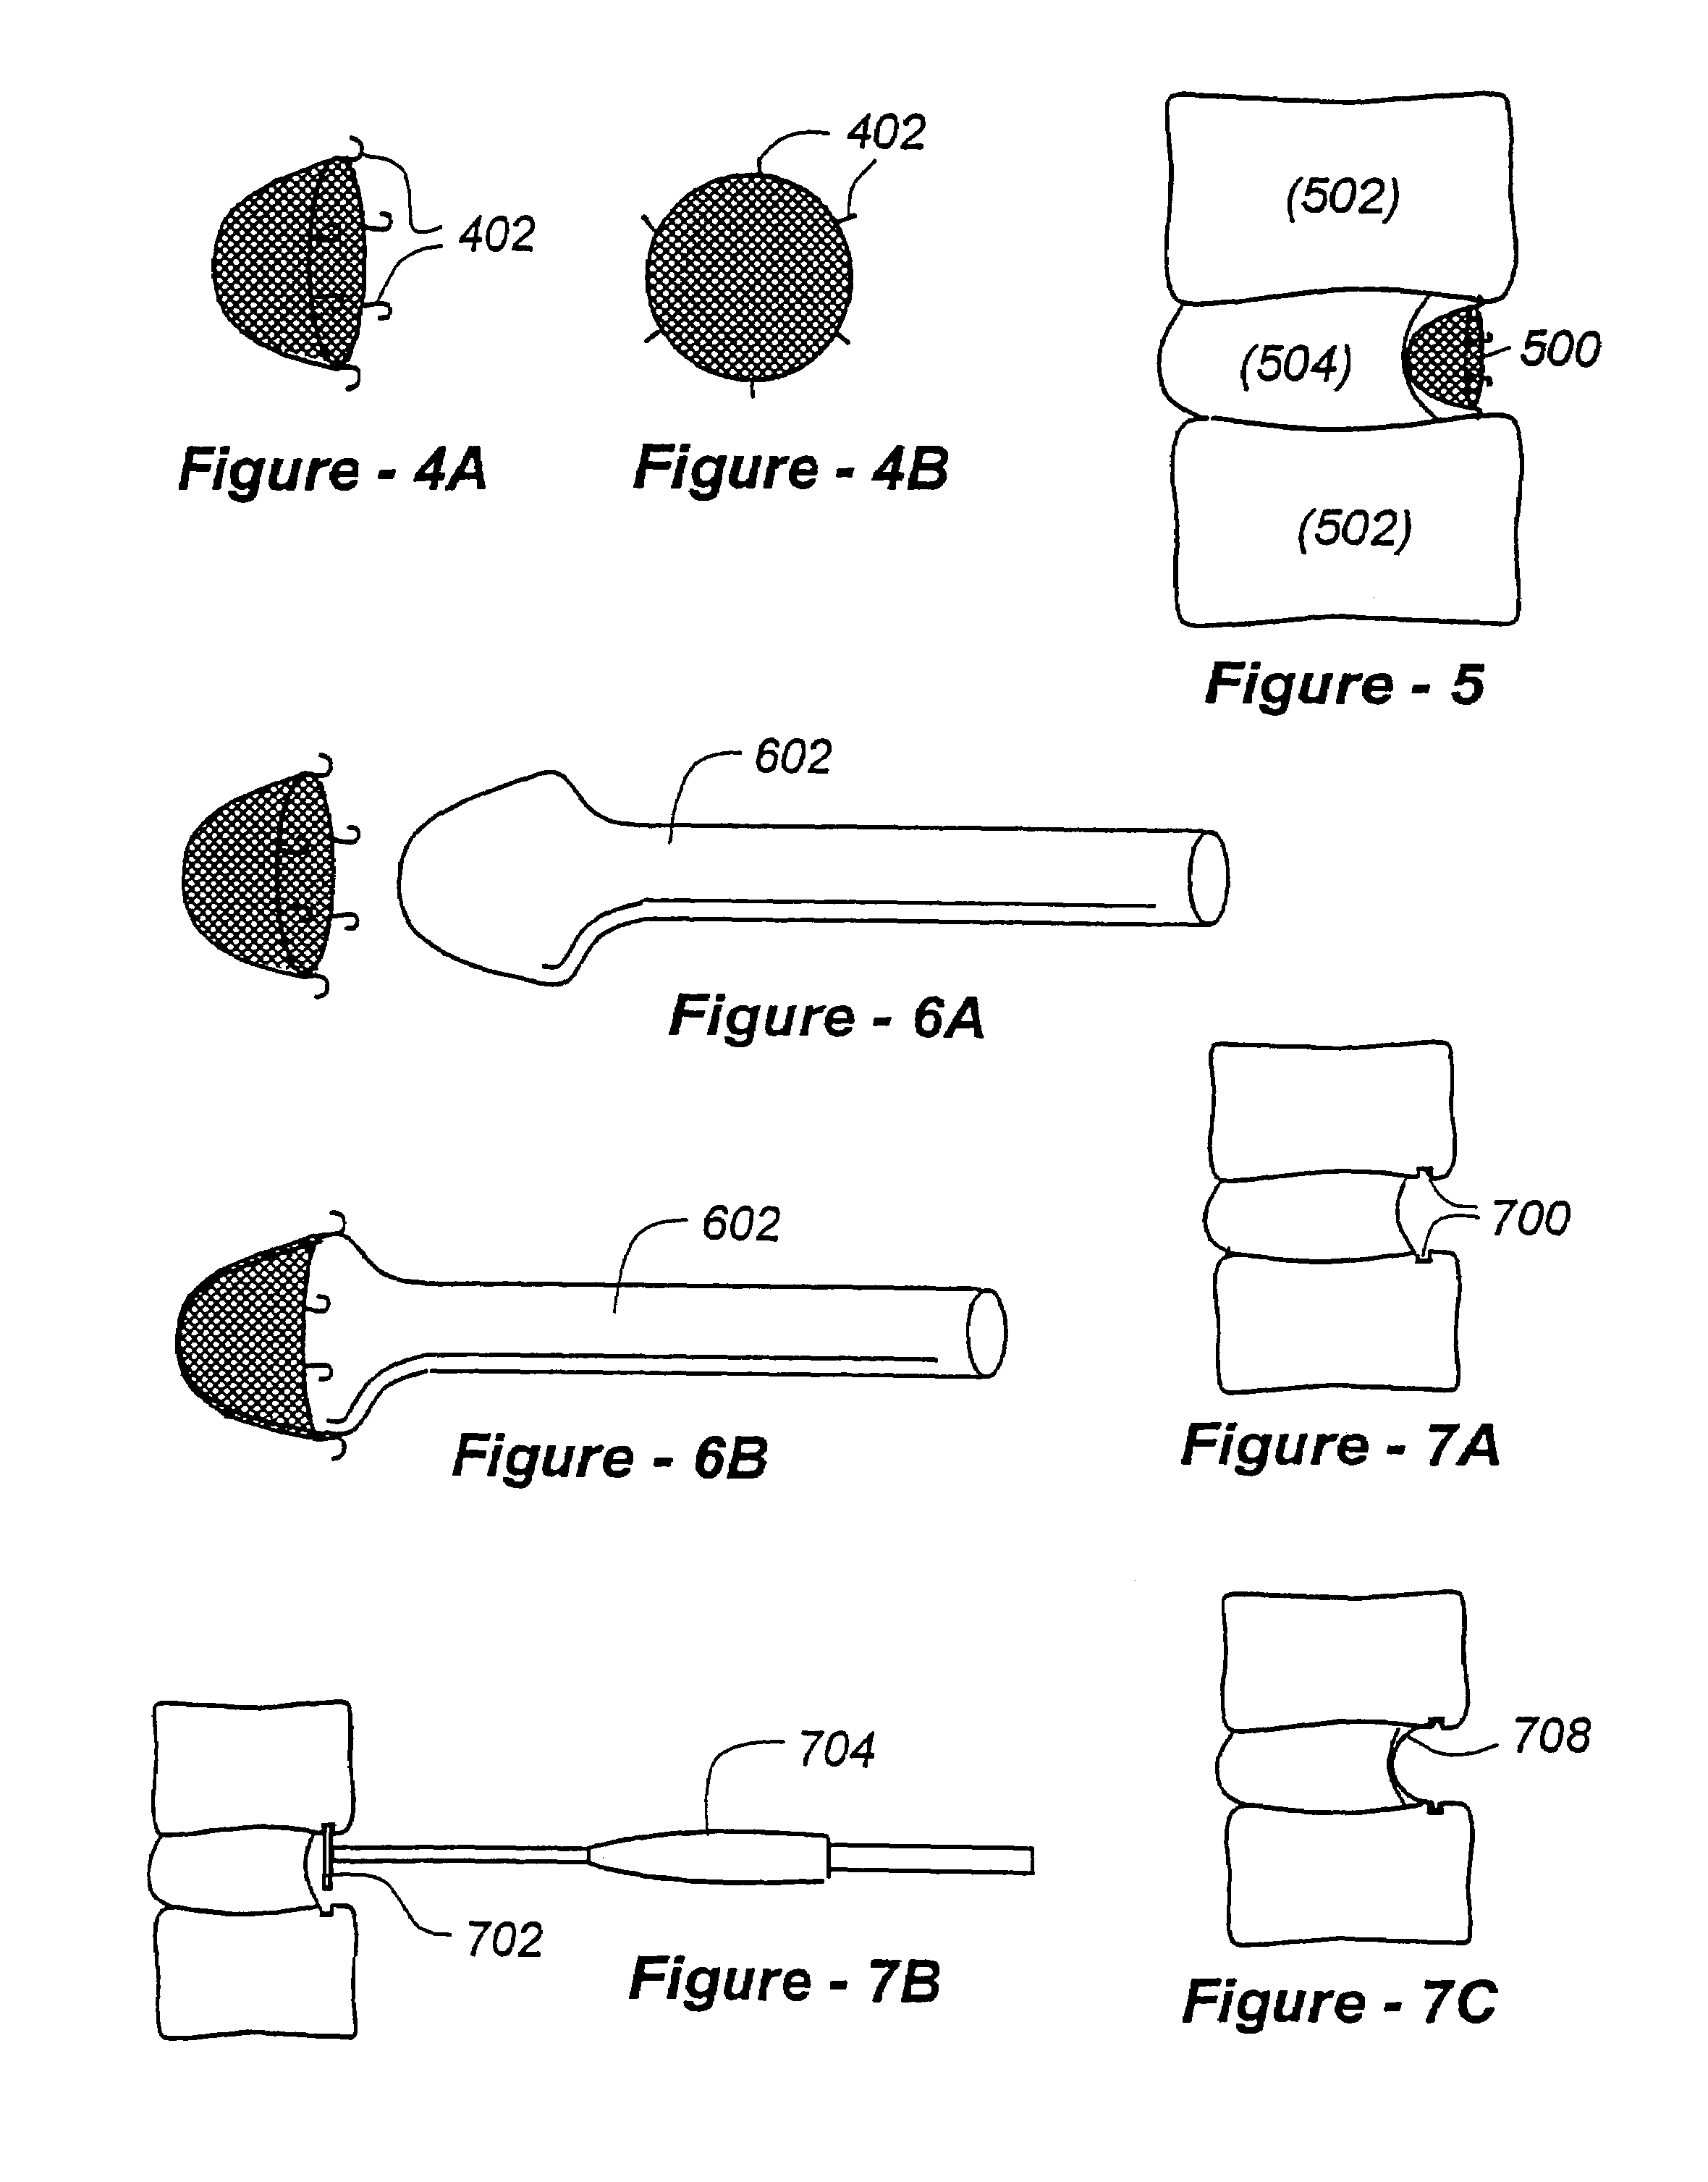 Methods for treating a defect in the annulus fibrosis